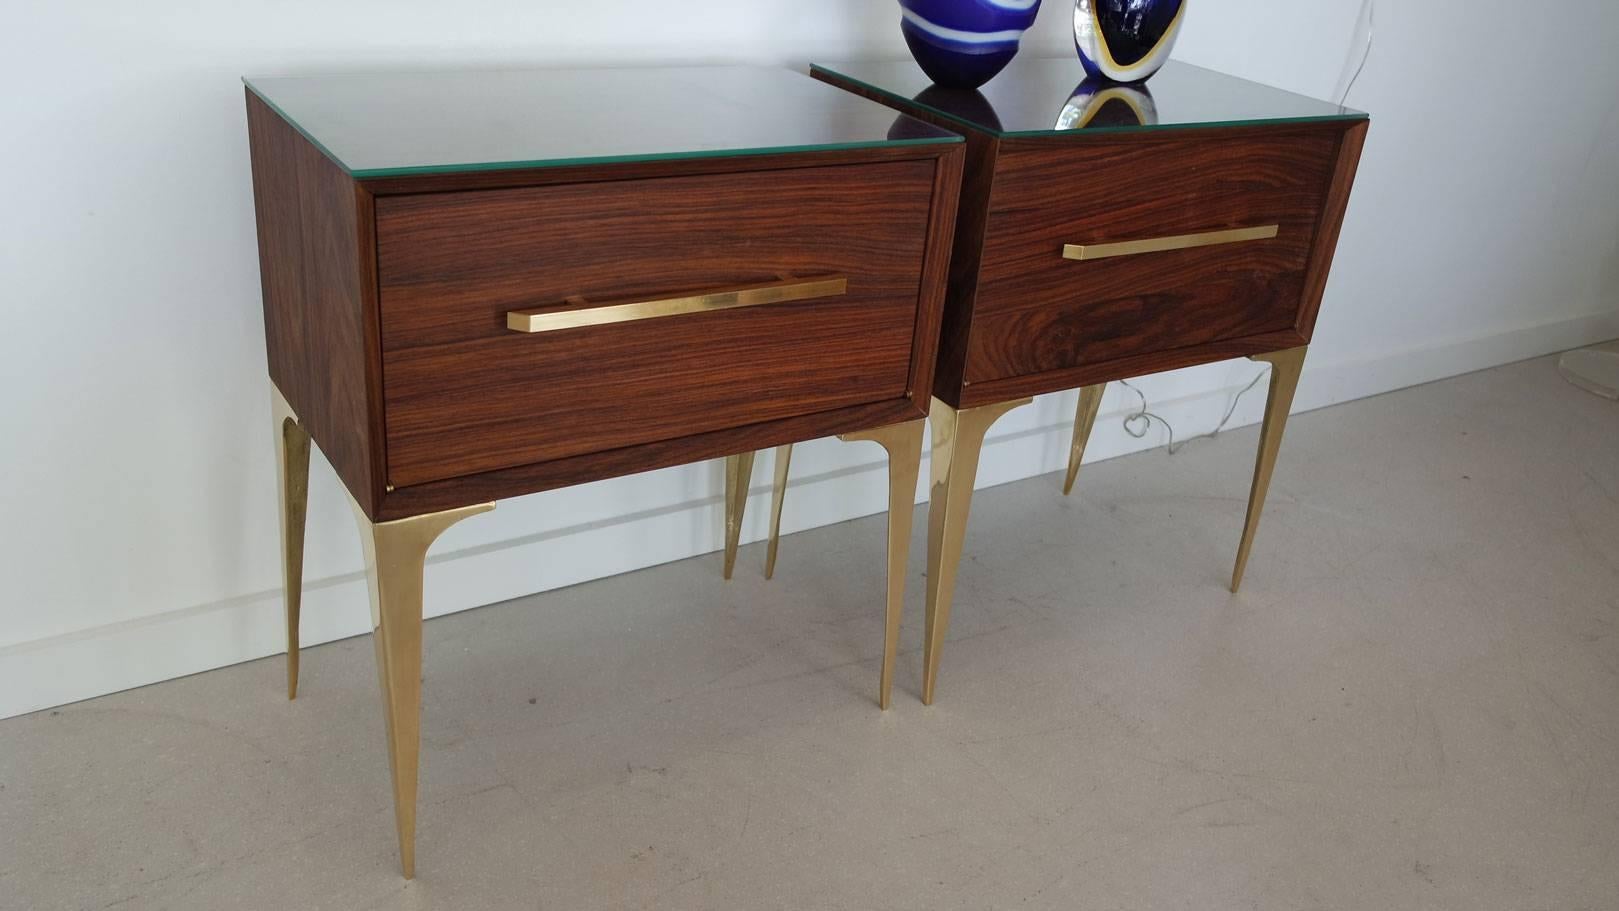 Pair of Mid-Century Modern palisander wood bedside tables with brass hardware and legs, and topped with glass.  Flip down fronts with open insides, both have been completely refinished and restored.